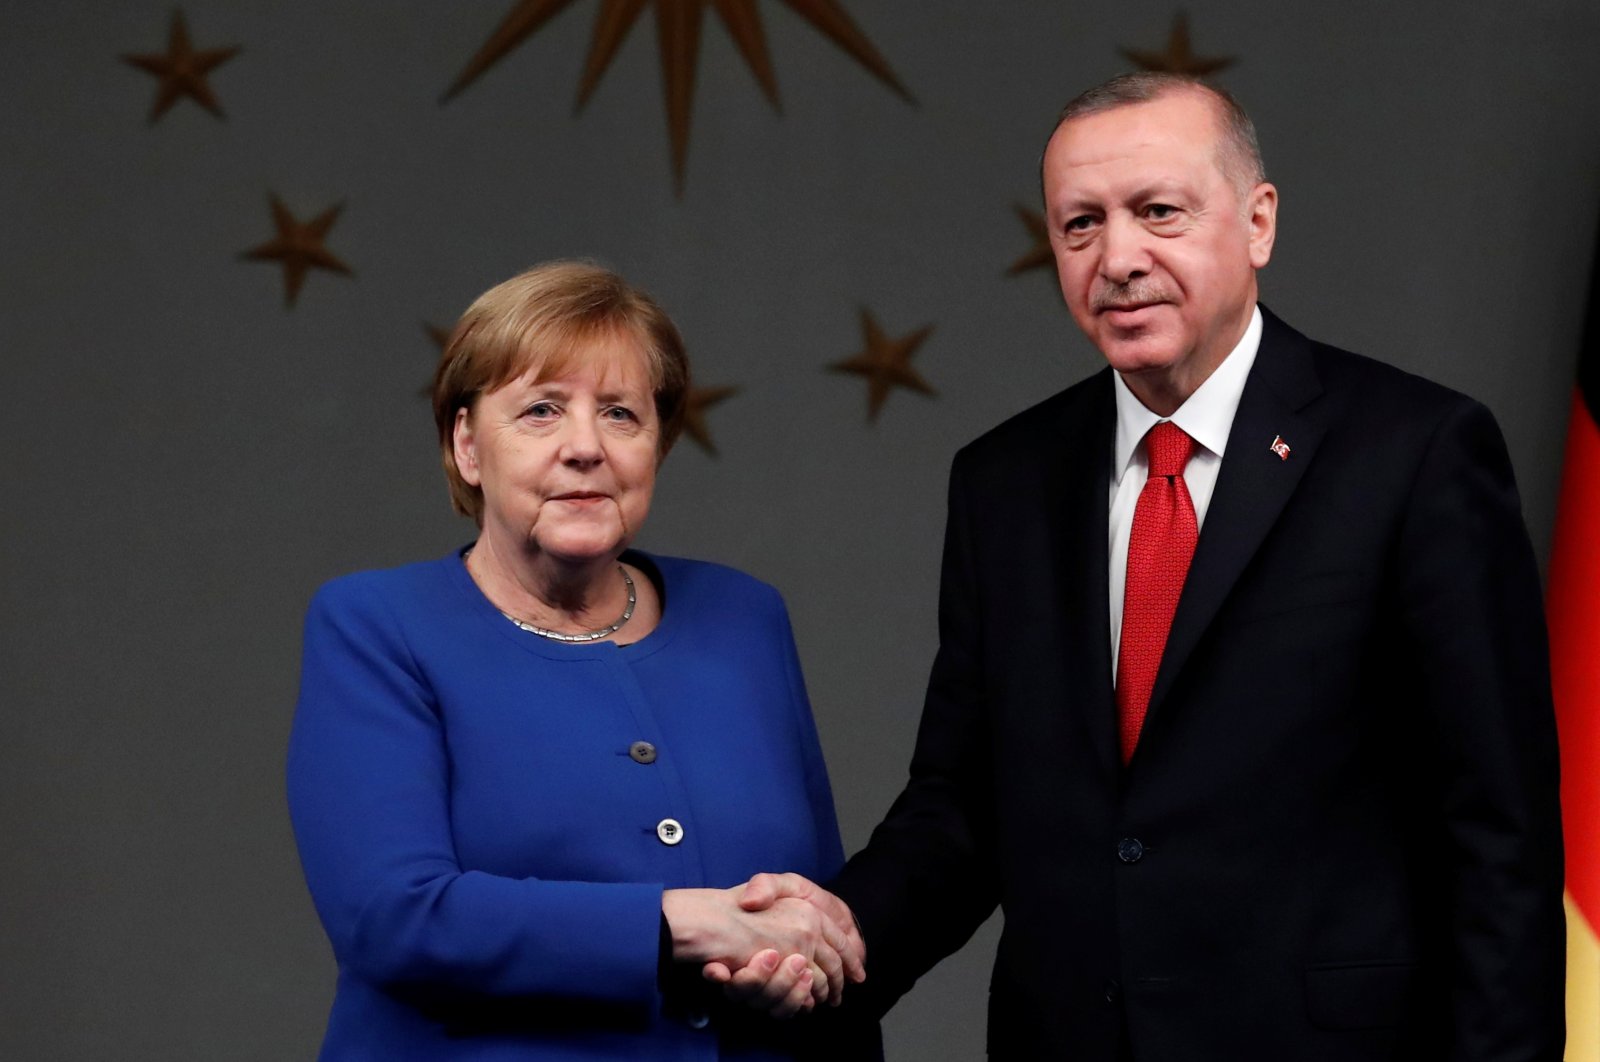 President Recep Tayyip Erdoğan and German Chancellor Angela Merkel shake hands after a joint news conference in Istanbul, Turkey, Jan. 24, 2020. (Reuters File Photo)